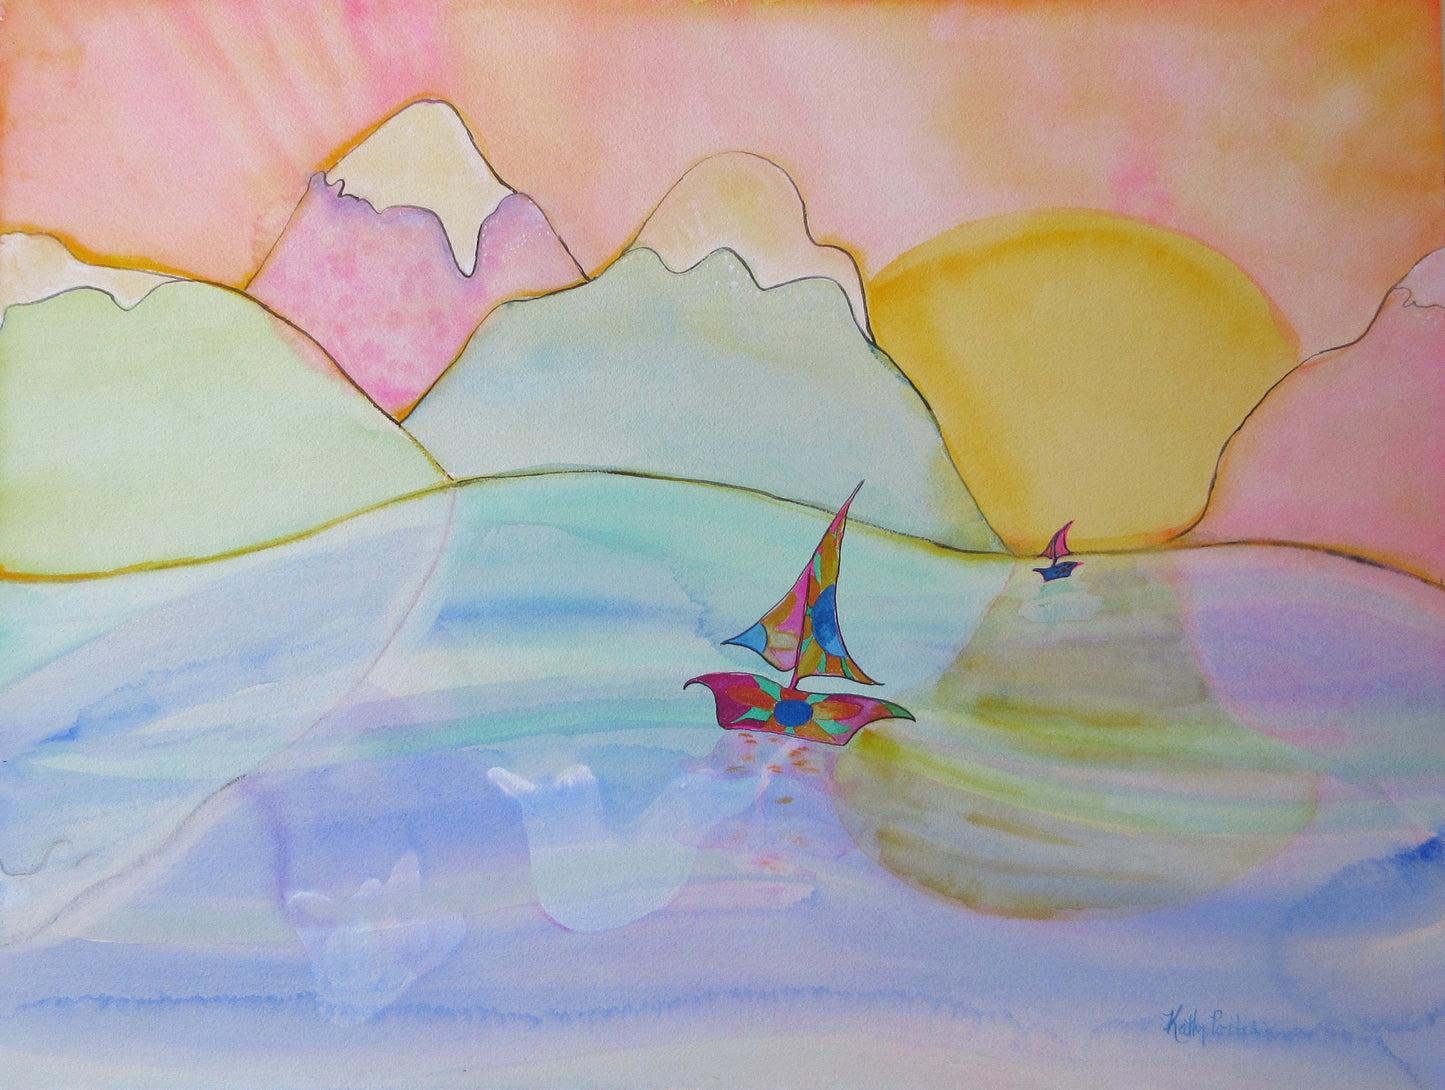 art card and naïve painting  of fantasy boats, mountains and calm waters.  Sunrise. by artist Kathy Poitras. 18 x 24 inches. watercolor and ink on rag paper. 